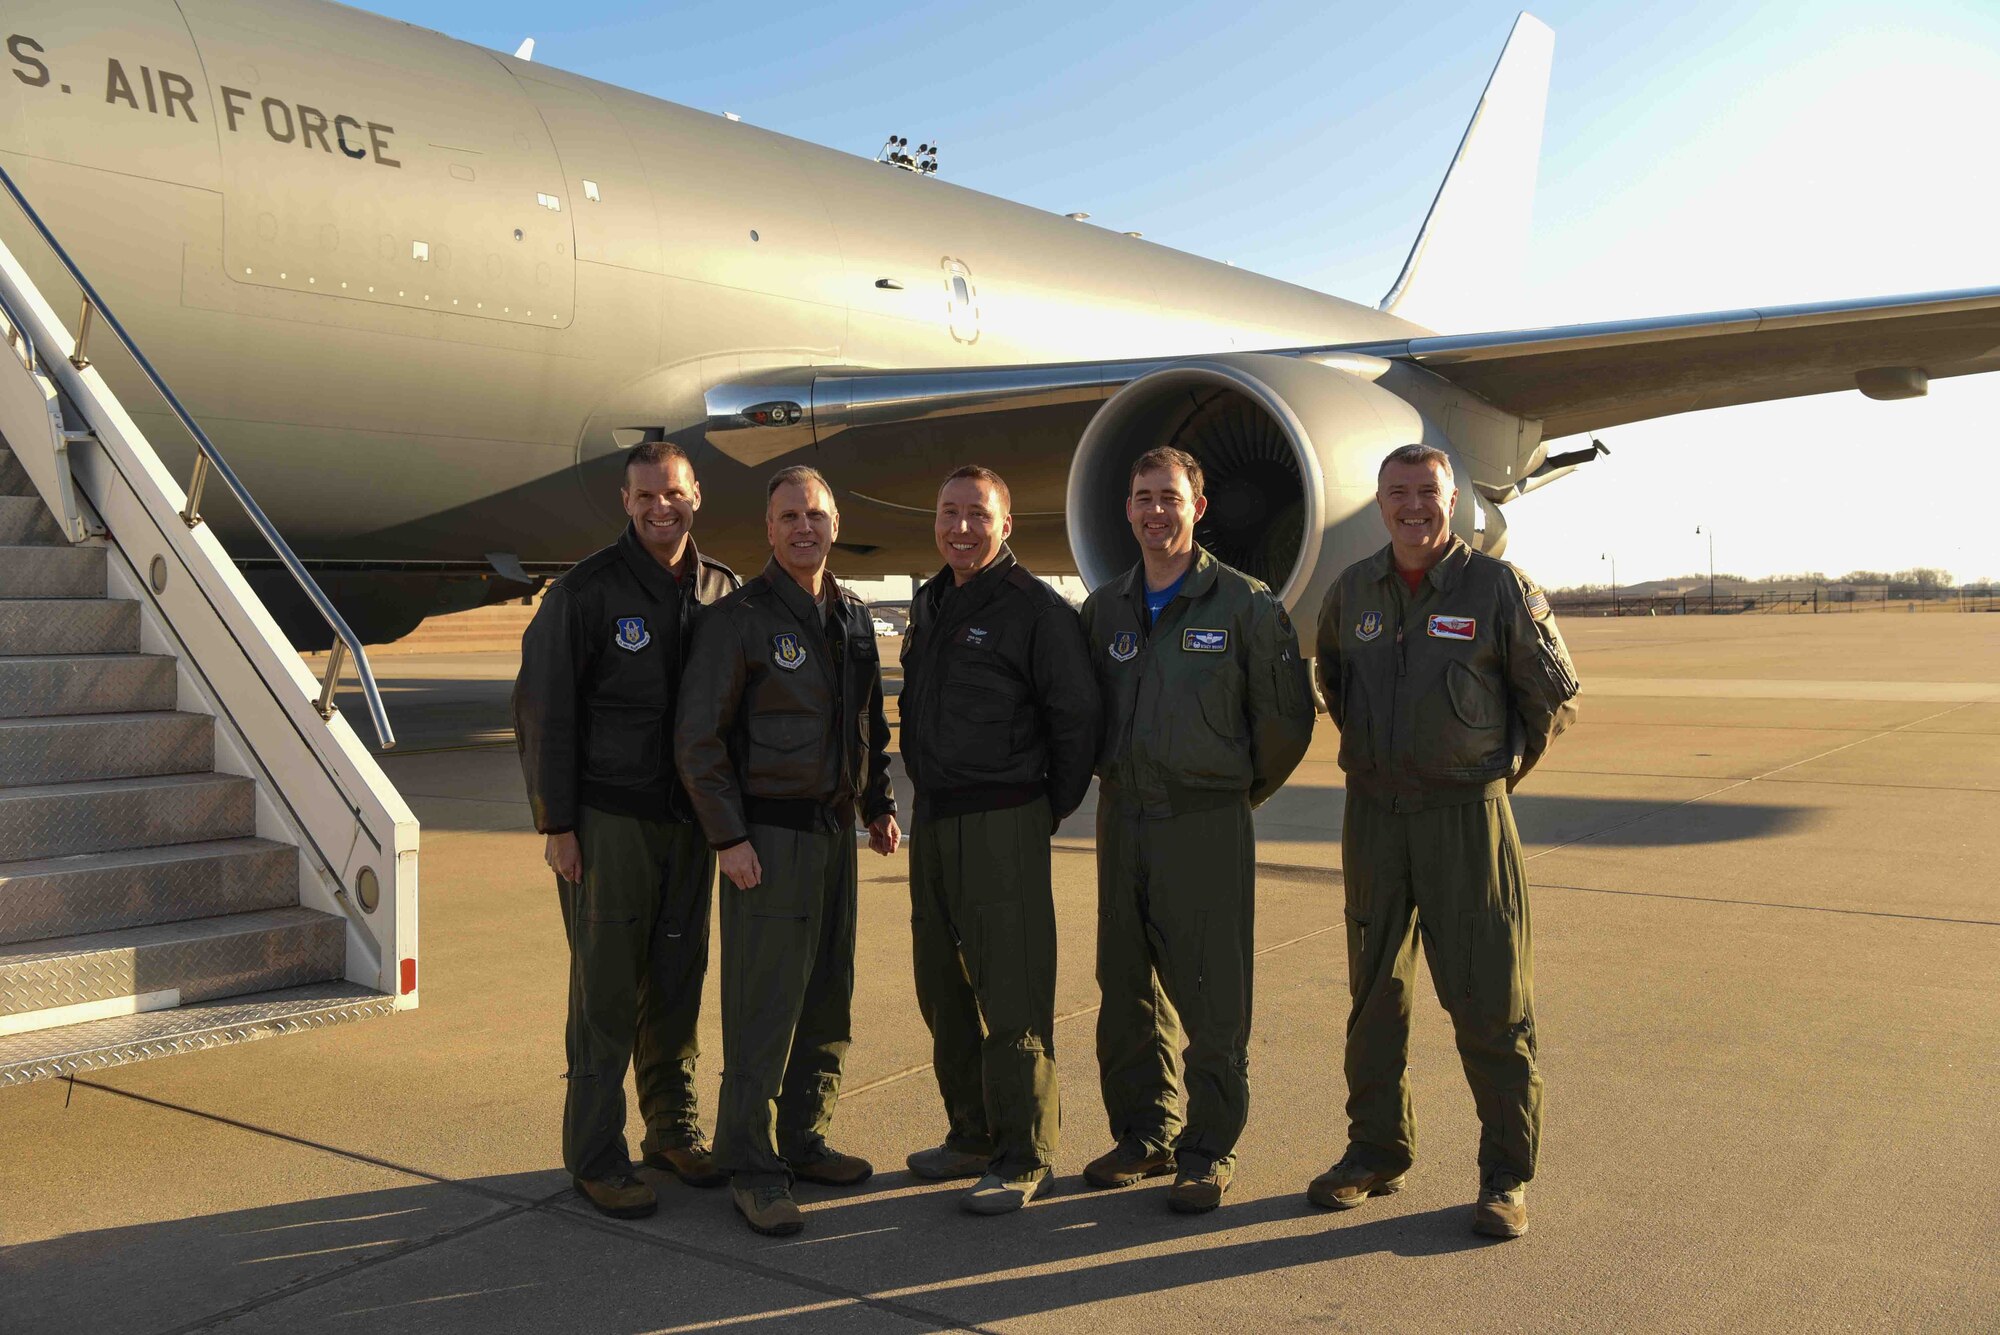 Maj. Gen. Randall A. Ogden, 4th Air Force commander, poses with aircrew that delivered McConnell’s 20th KC-46A Pegasus, Dec. 20, 2019, at McConnell Air Force Base, Kan. McConnell will have a fleet of 36 KC-46s to lead the future of aerial refueling. (U.S. Air Force photo by Airman 1st Class Alexi Bosarge)